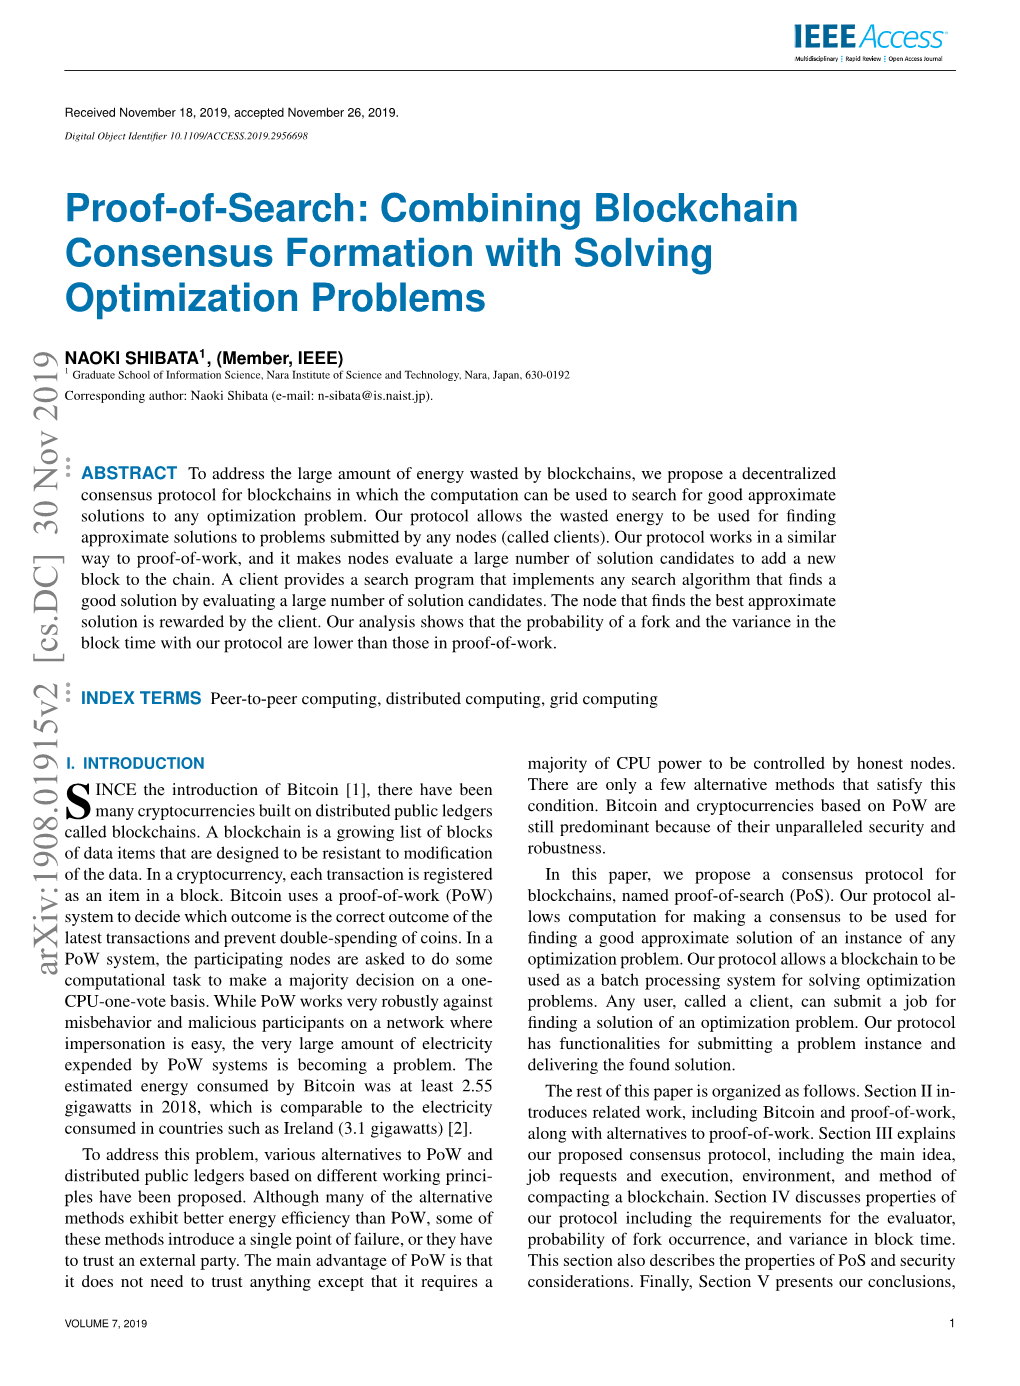 Proof-Of-Search: Combining Blockchain Consensus Formation with Solving Optimization Problems